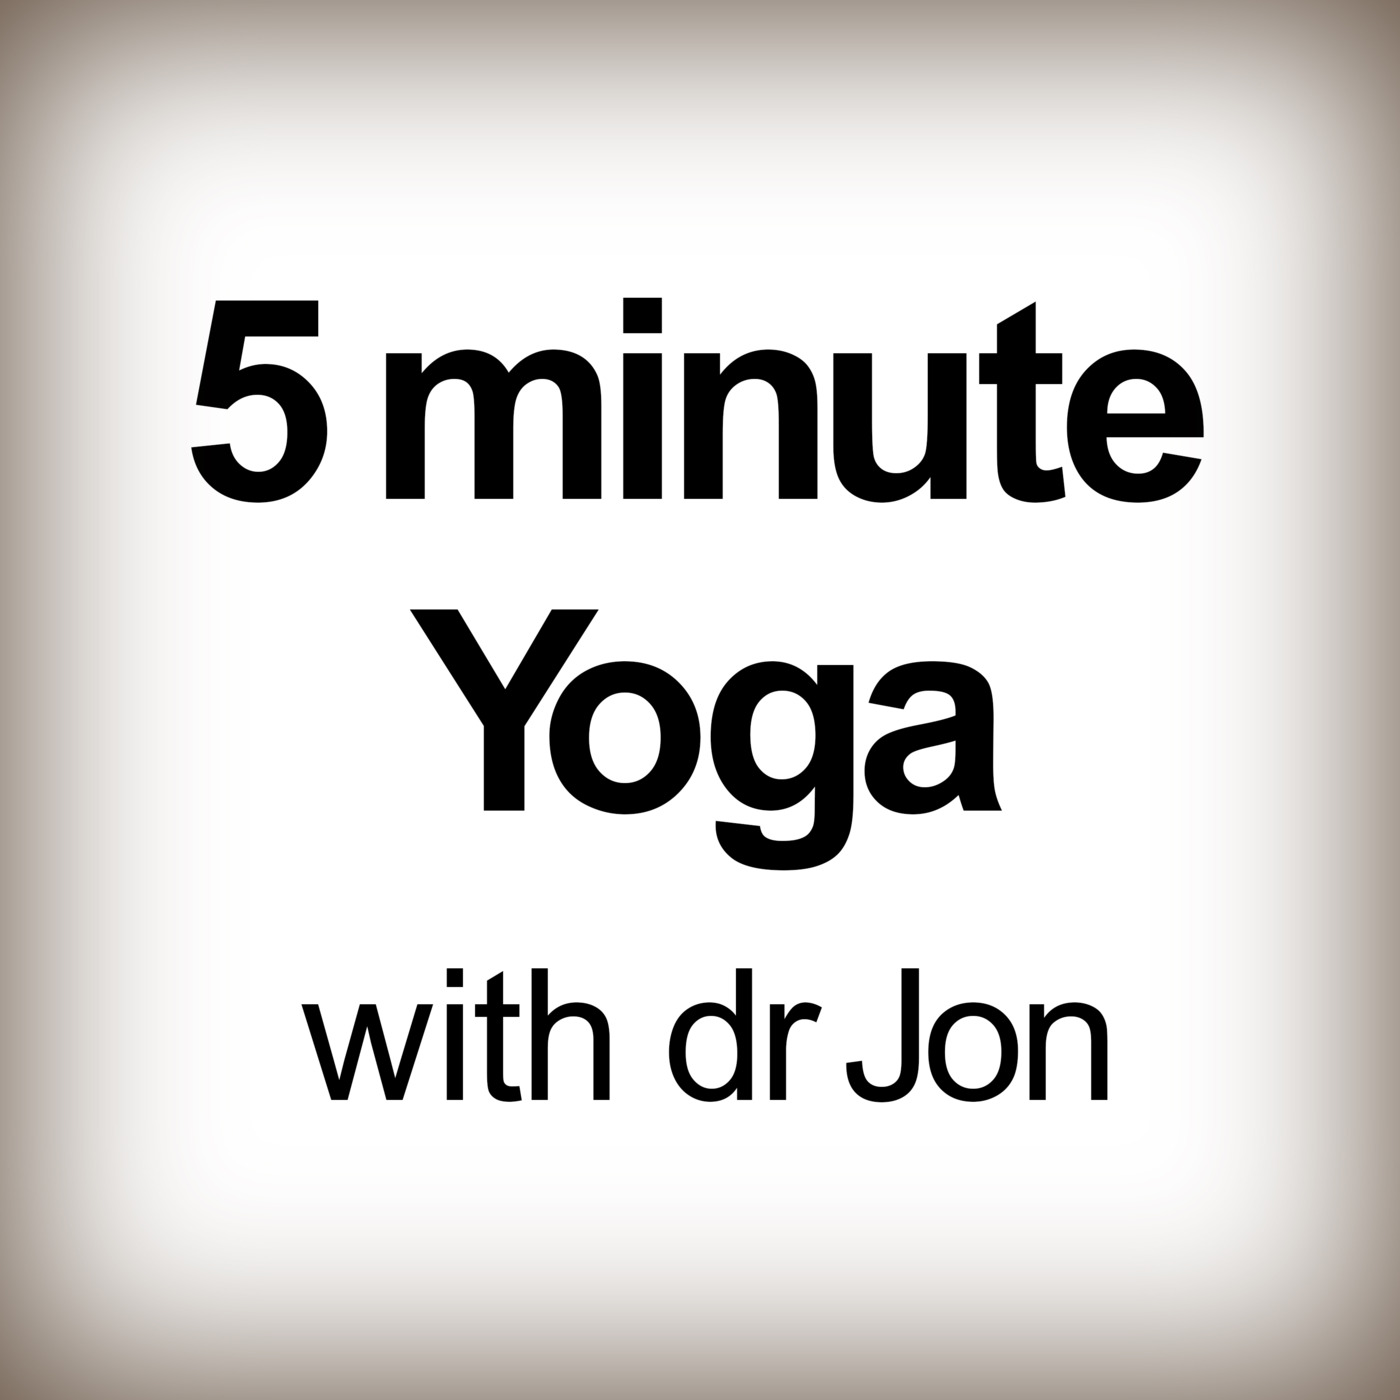 5 minute Yoga with dr Jon